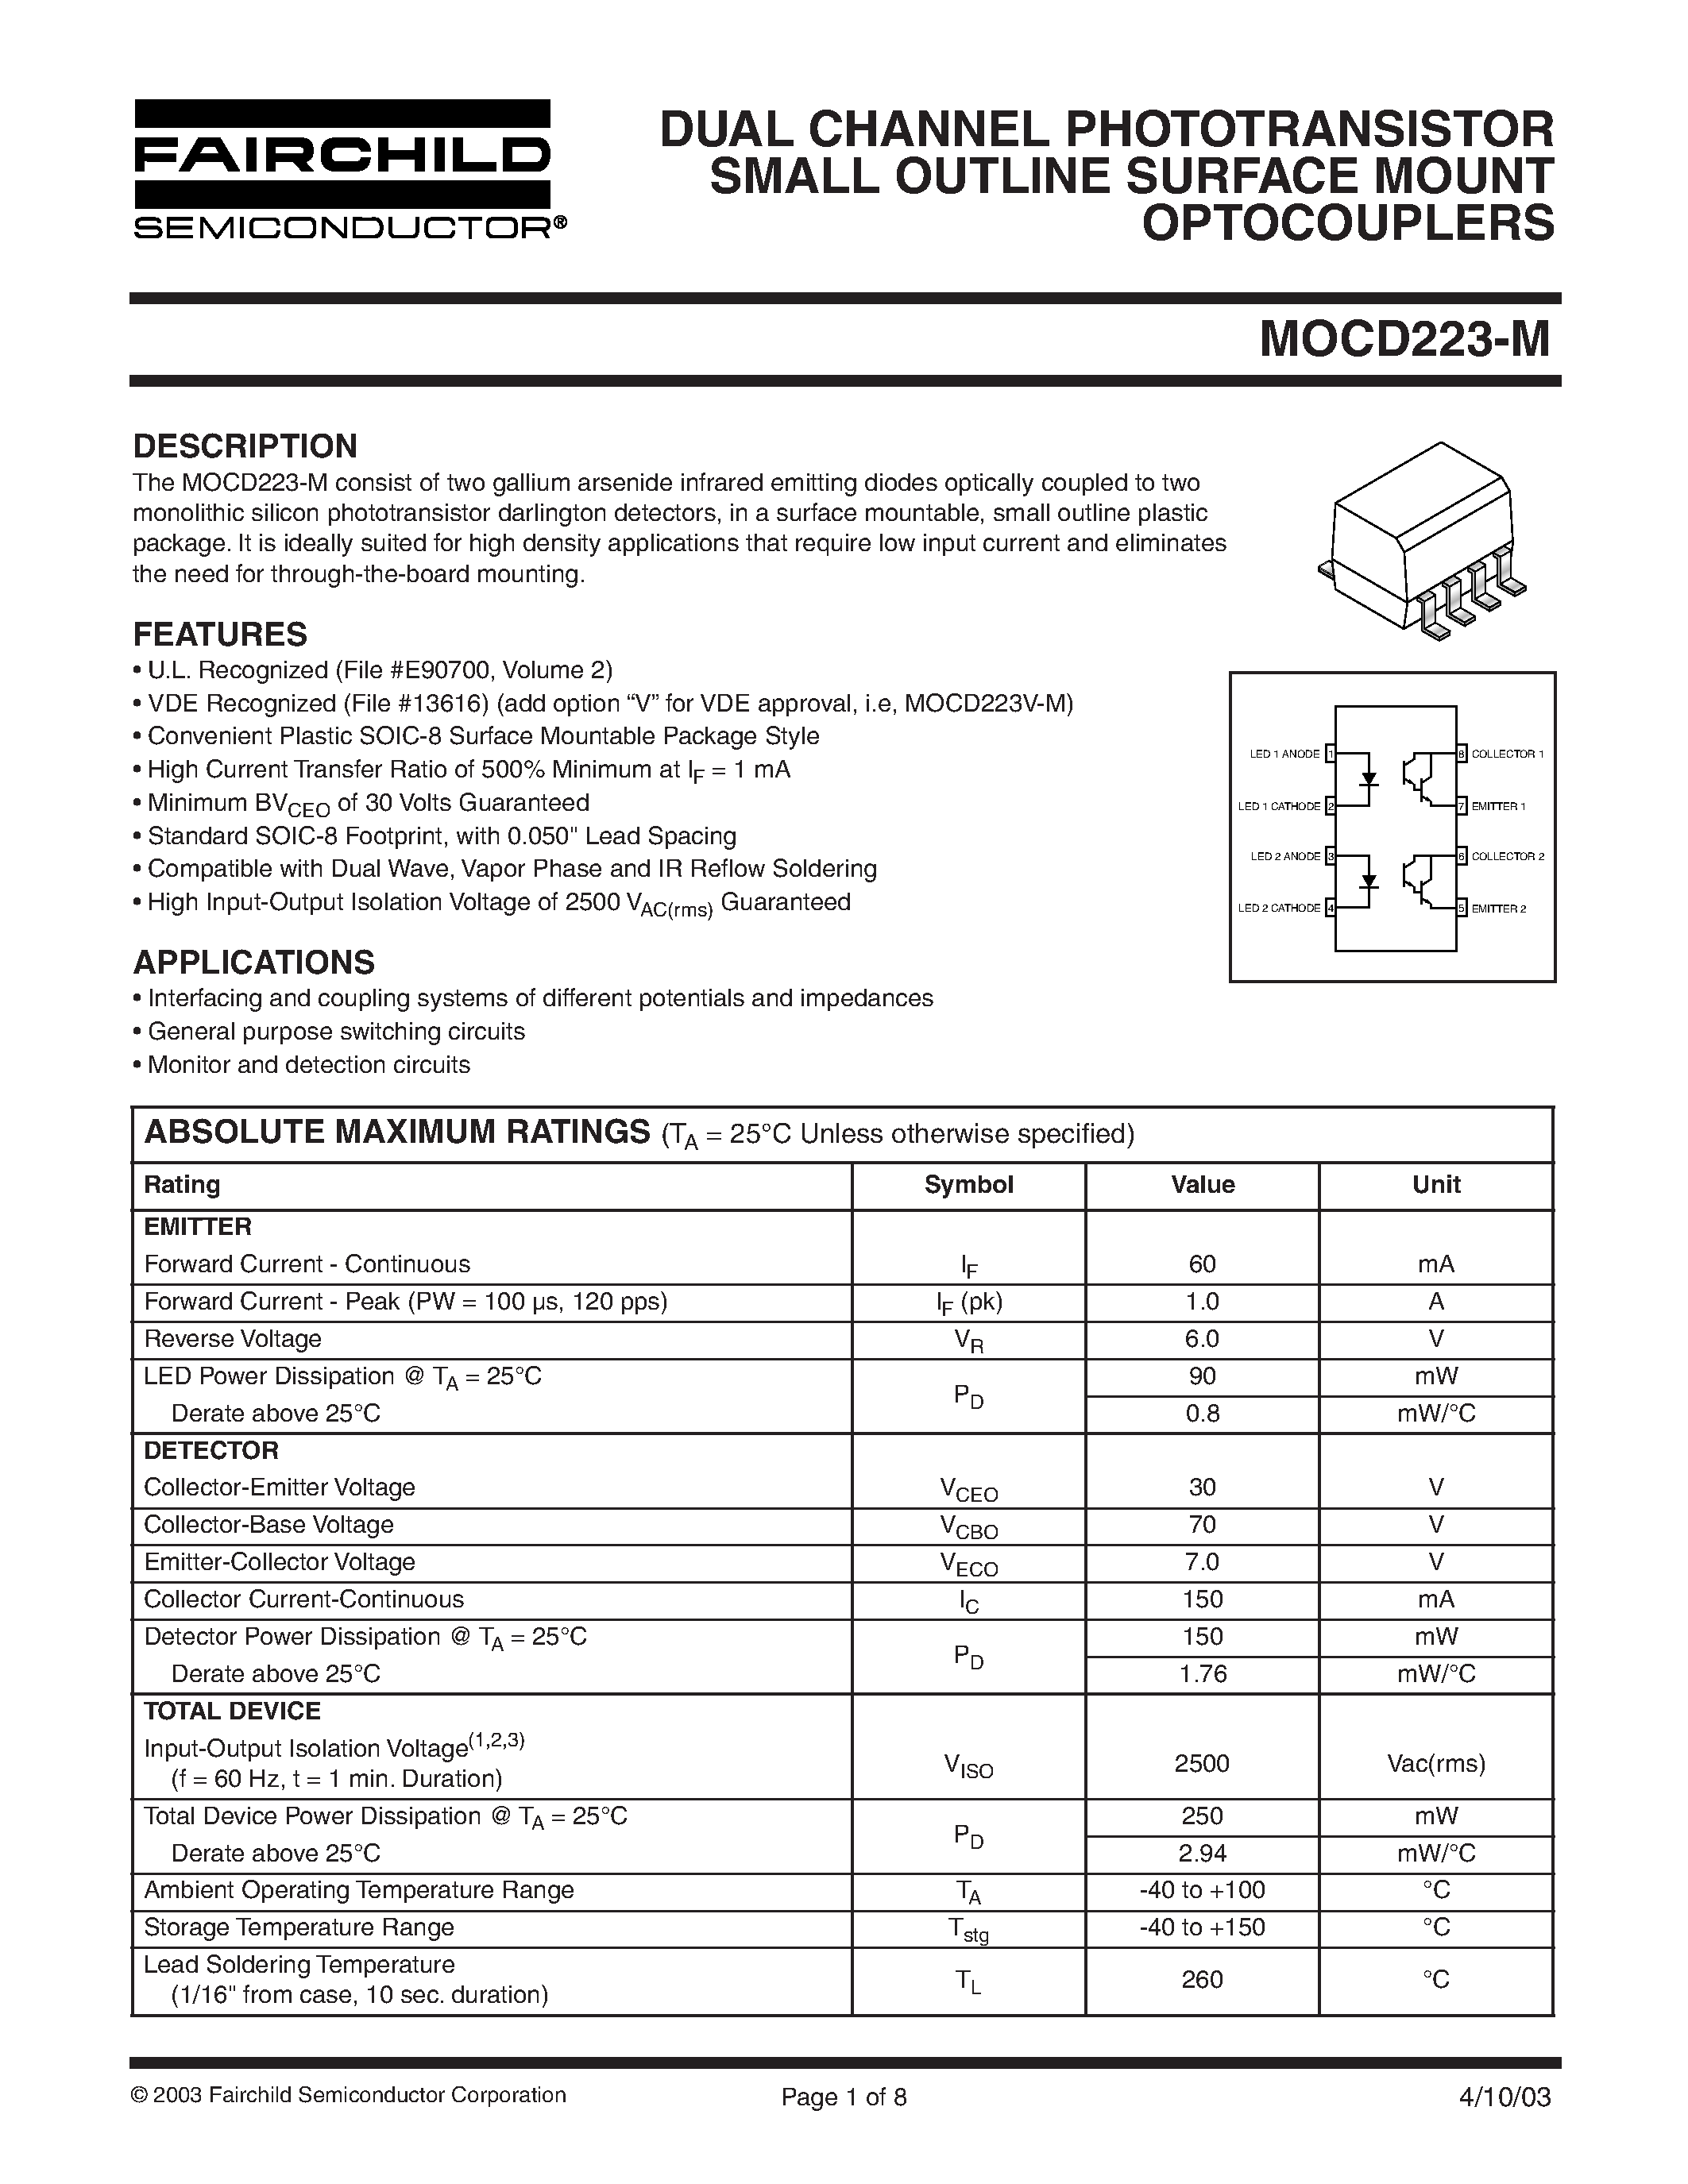 Datasheet MOCD223-M - DUAL CHANNEL PHOTOTRANSISTOR SMALL OUTLINE SURFACE MOUNT OPTOCOUPLERS page 1